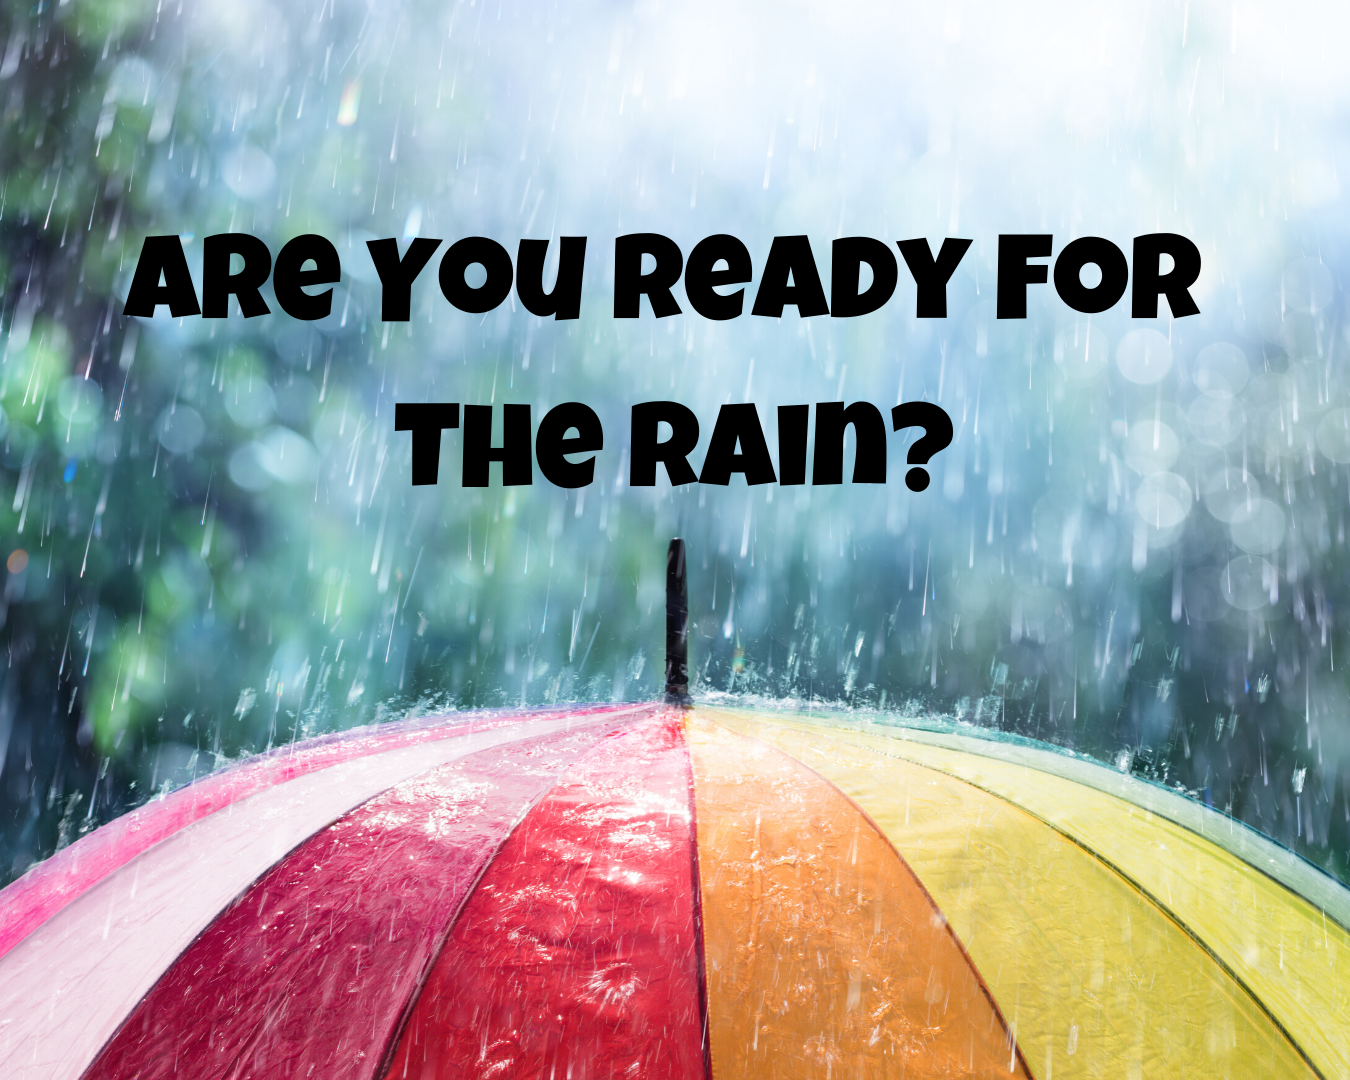 Are You Ready For The Rain?